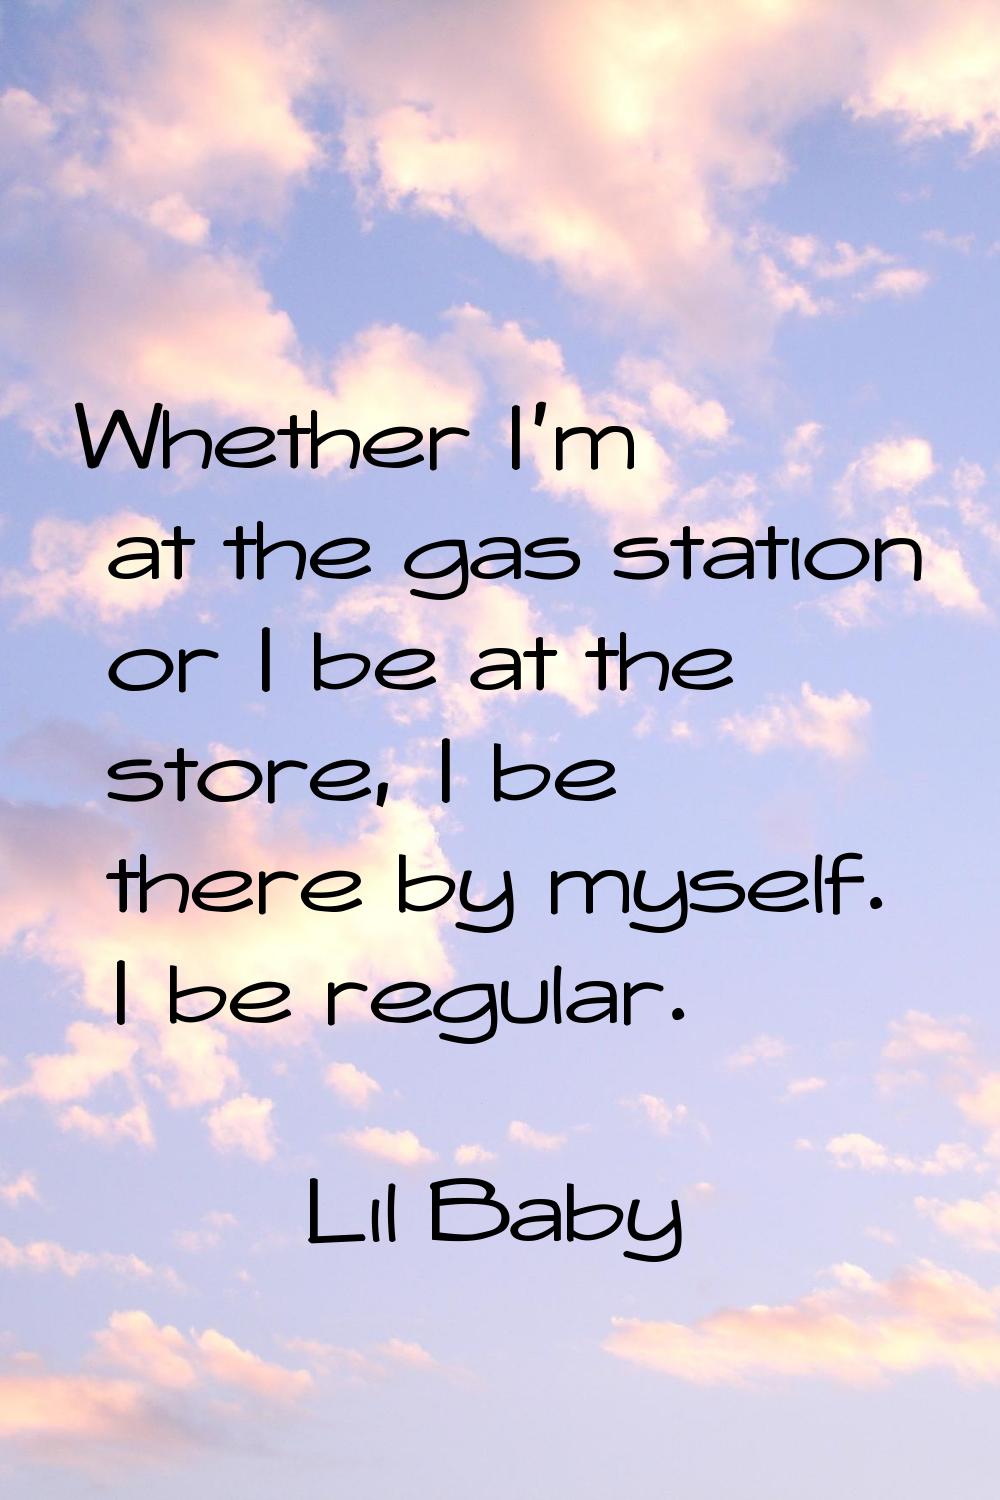 Whether I'm at the gas station or I be at the store, I be there by myself. I be regular.